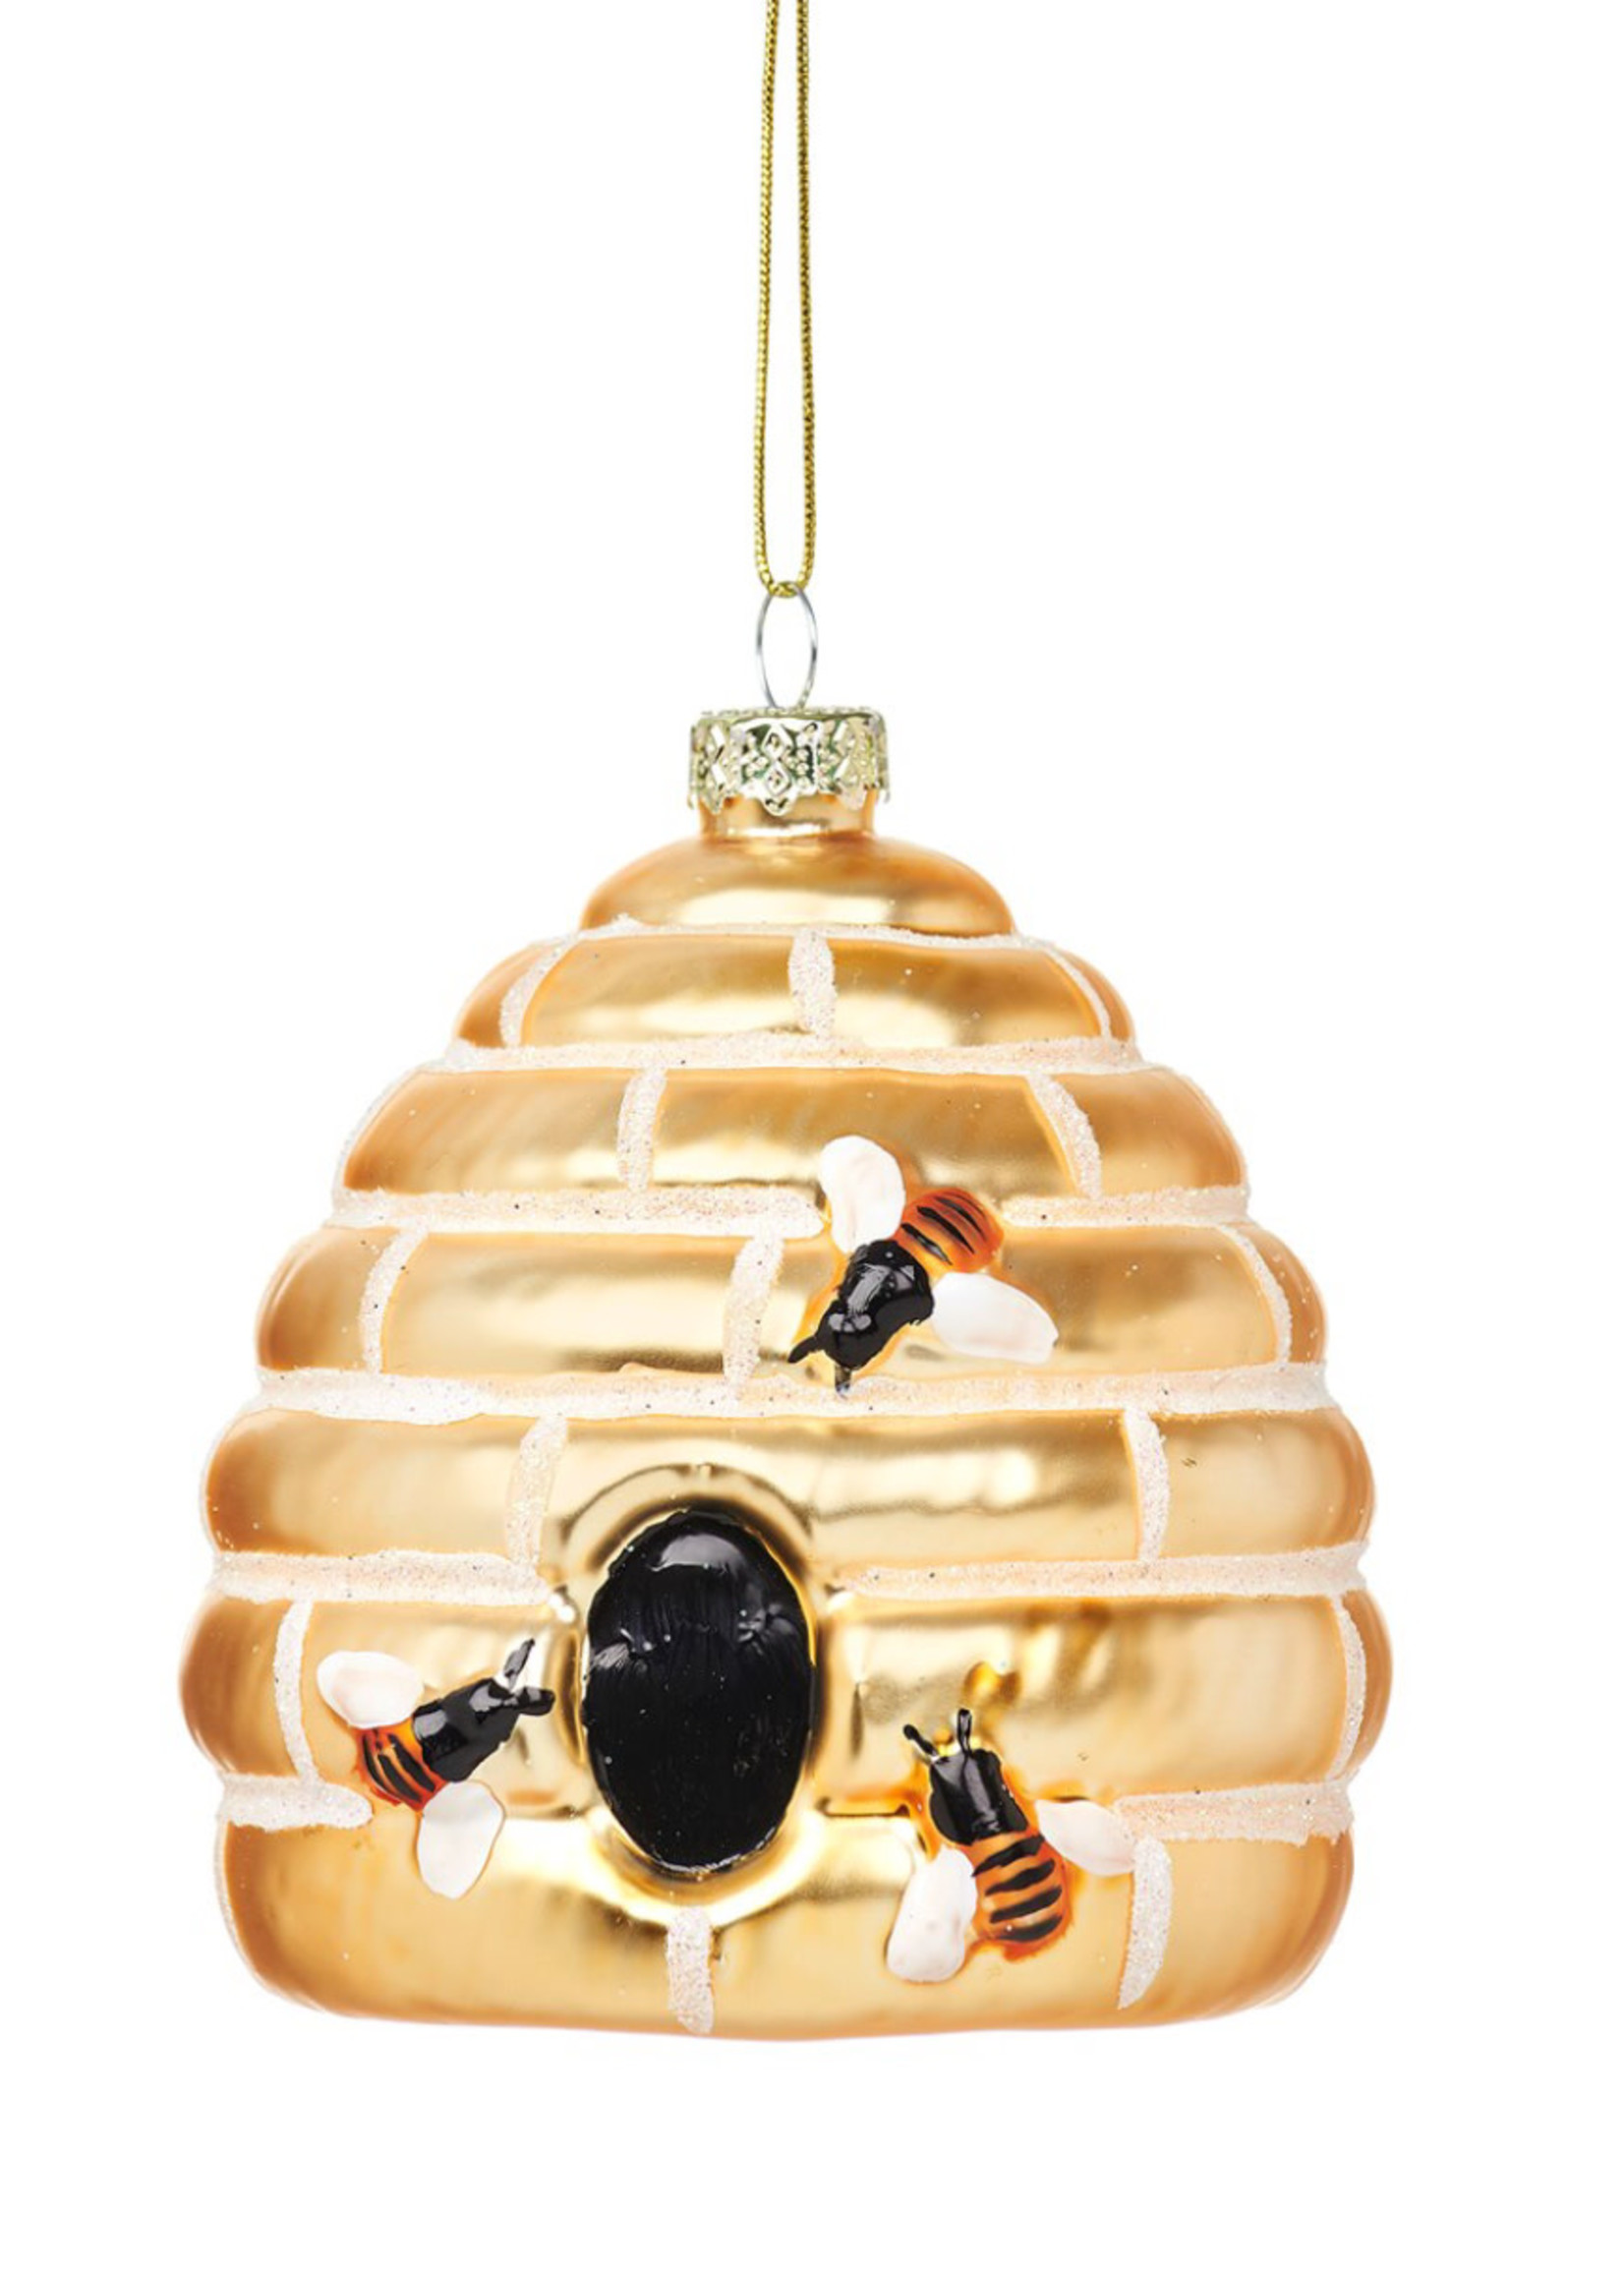 Sass & Belle Beehive Hanging Christmas Bauble